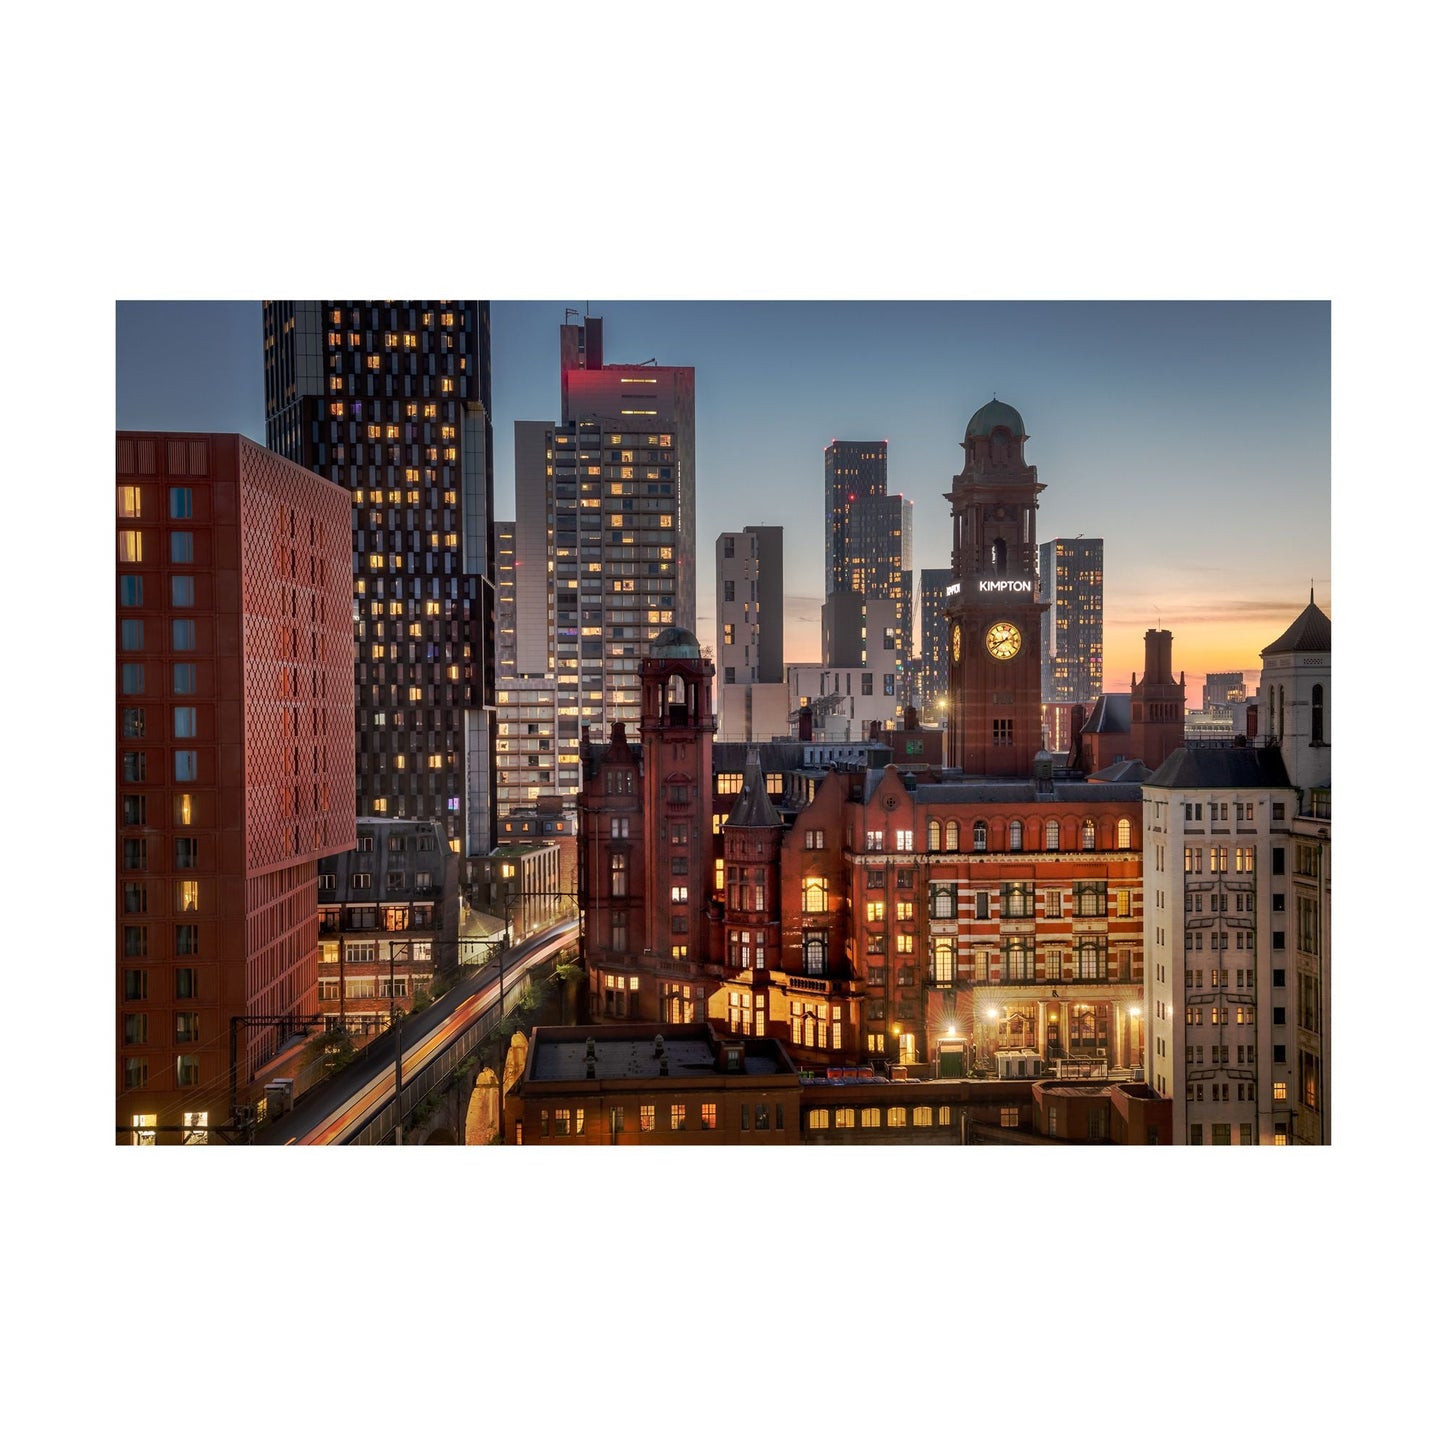 Load image into Gallery viewer, Simon Buckley photography of the Manchester skyline seen towards the Principal. The scene is a sunset or early morning with lights shining form the windows and soft peach and orange hues in the background of the sky.
